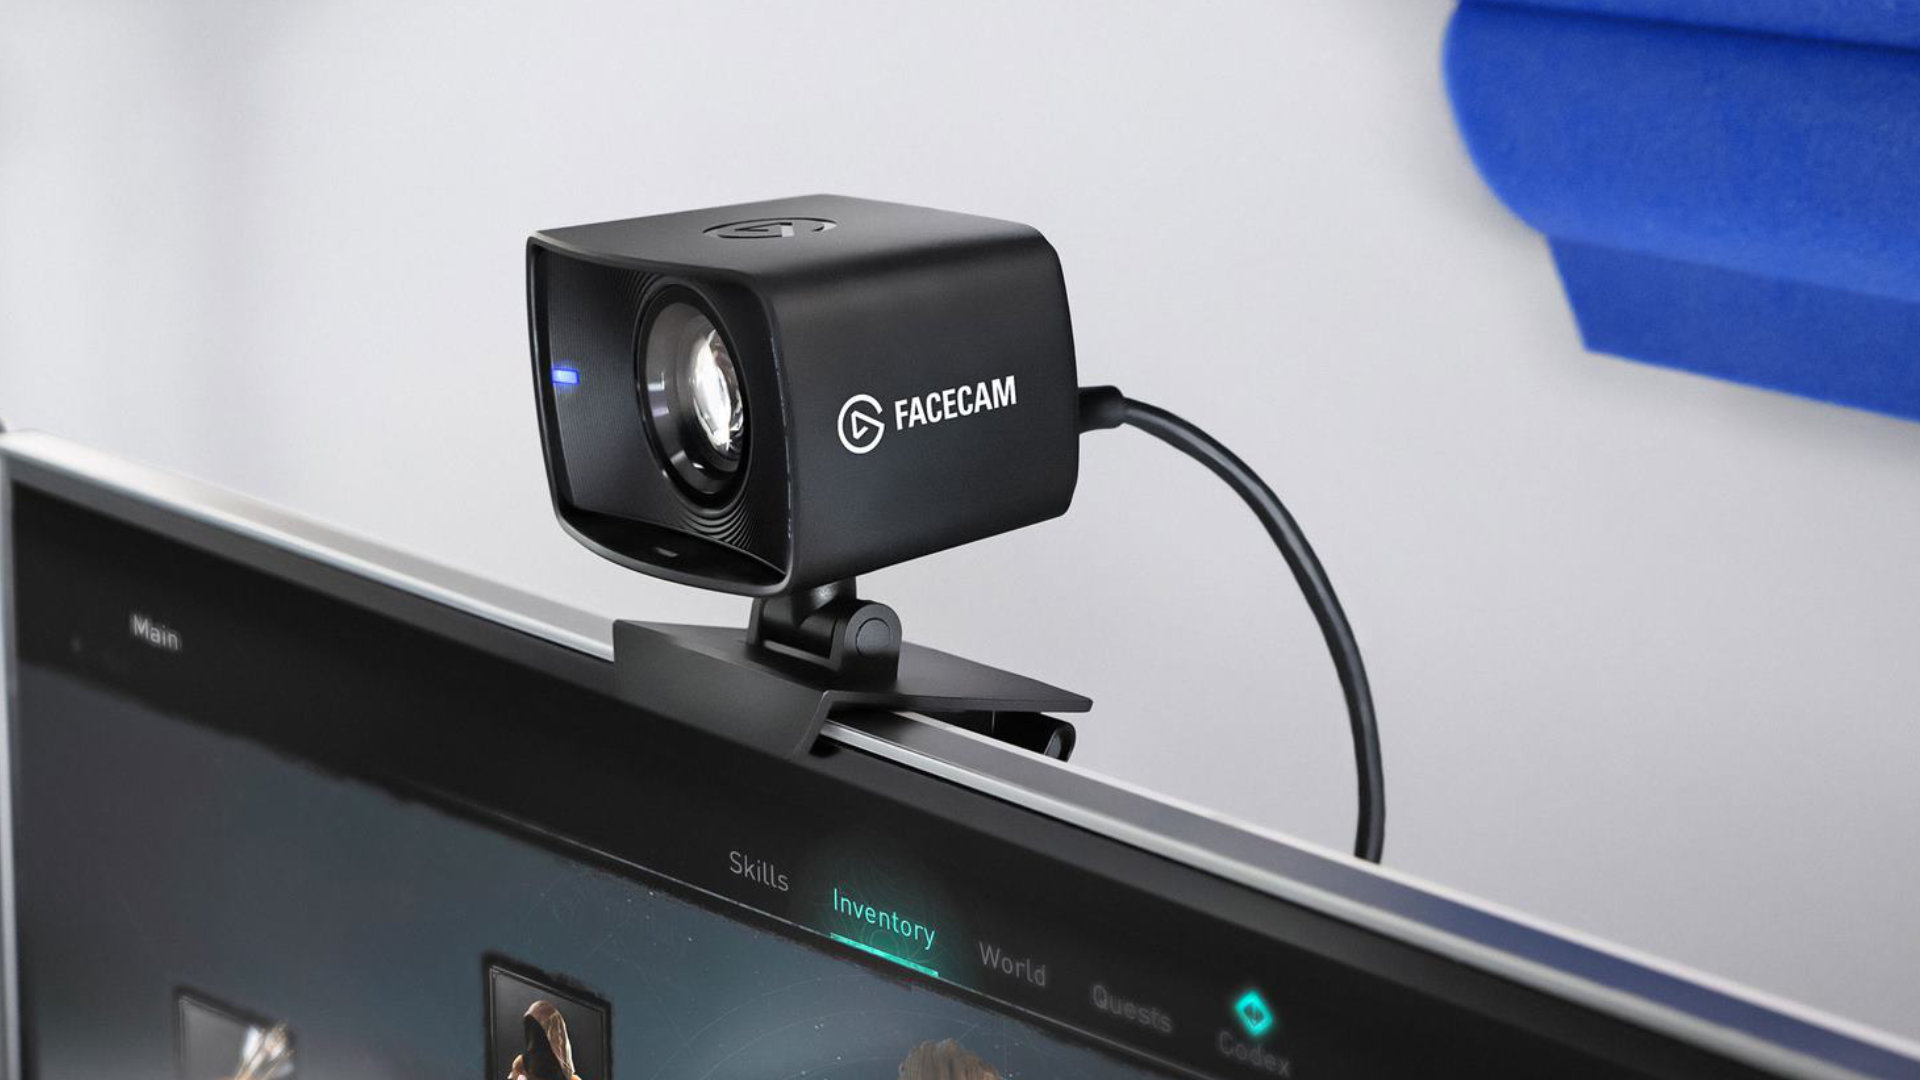 The best webcam for streaming is the Elgato Facecam with its Stream Deck integration